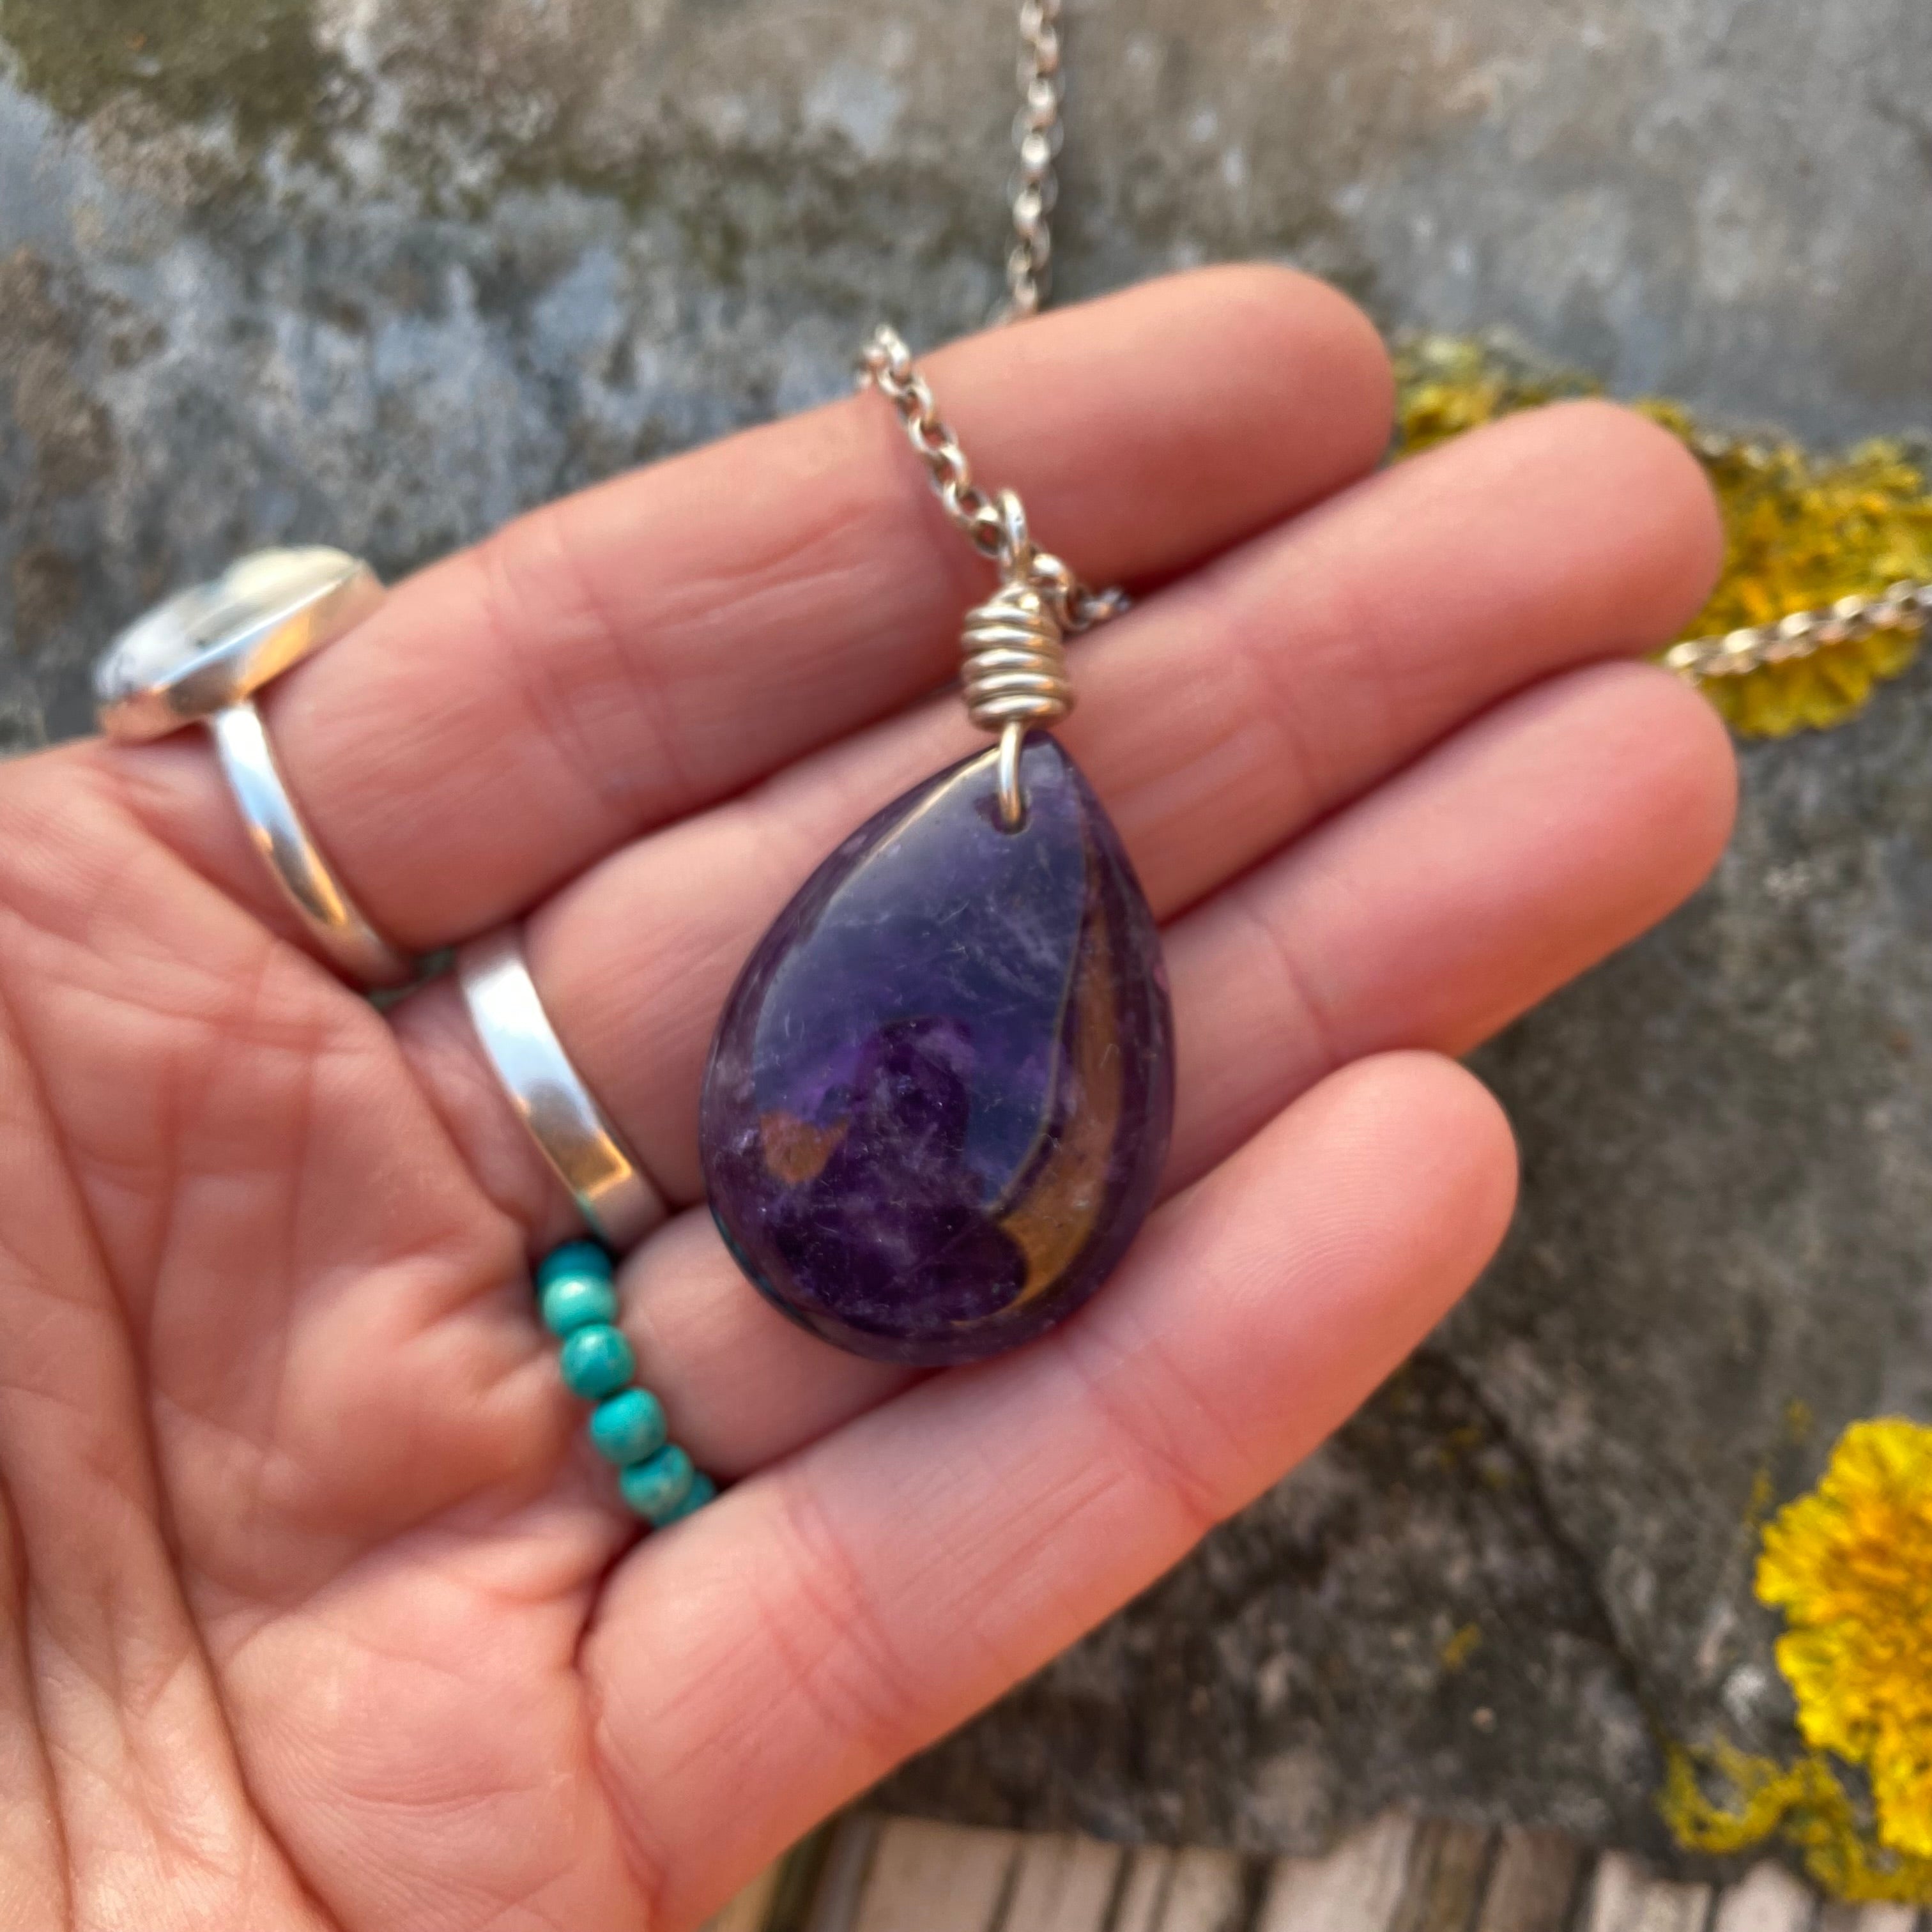 Amethyst Teardrop Necklace - Sterling Silver Belcher Chain - Natural Crystal - February